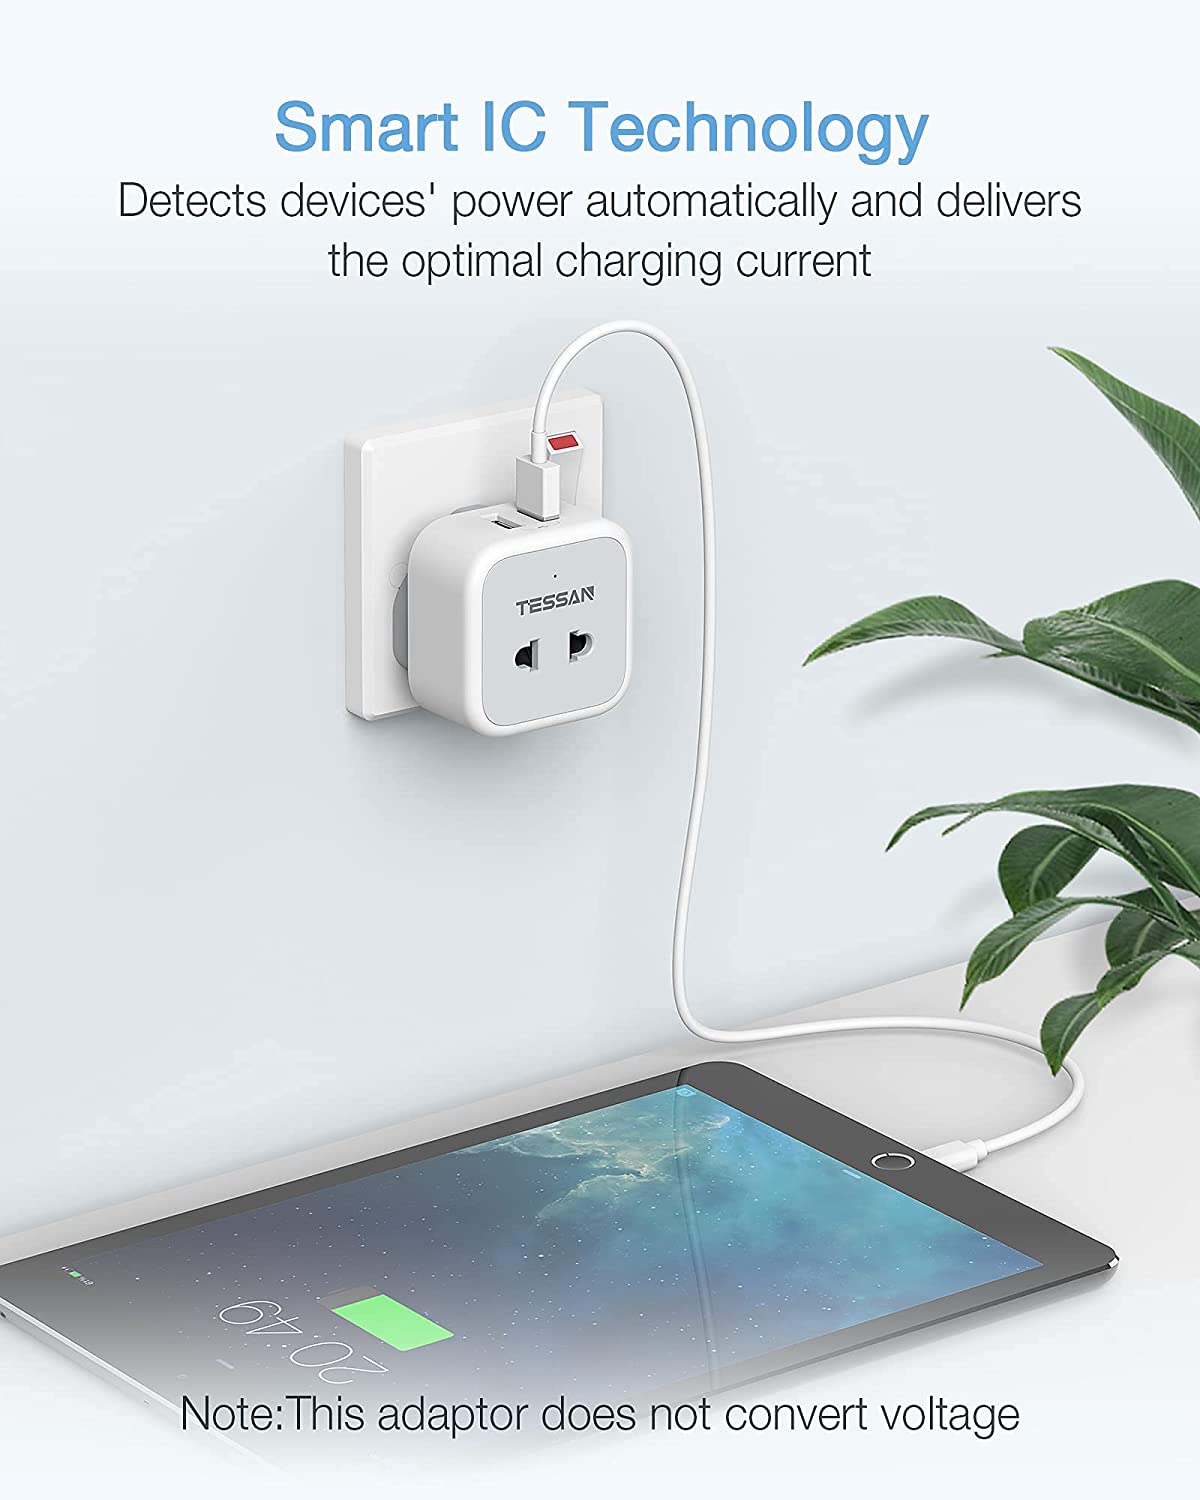 Shaver Charger 2 Pin to 3 Pin Adapter Plug Socket with 2 USB for Bathroom Electric Toothbrush